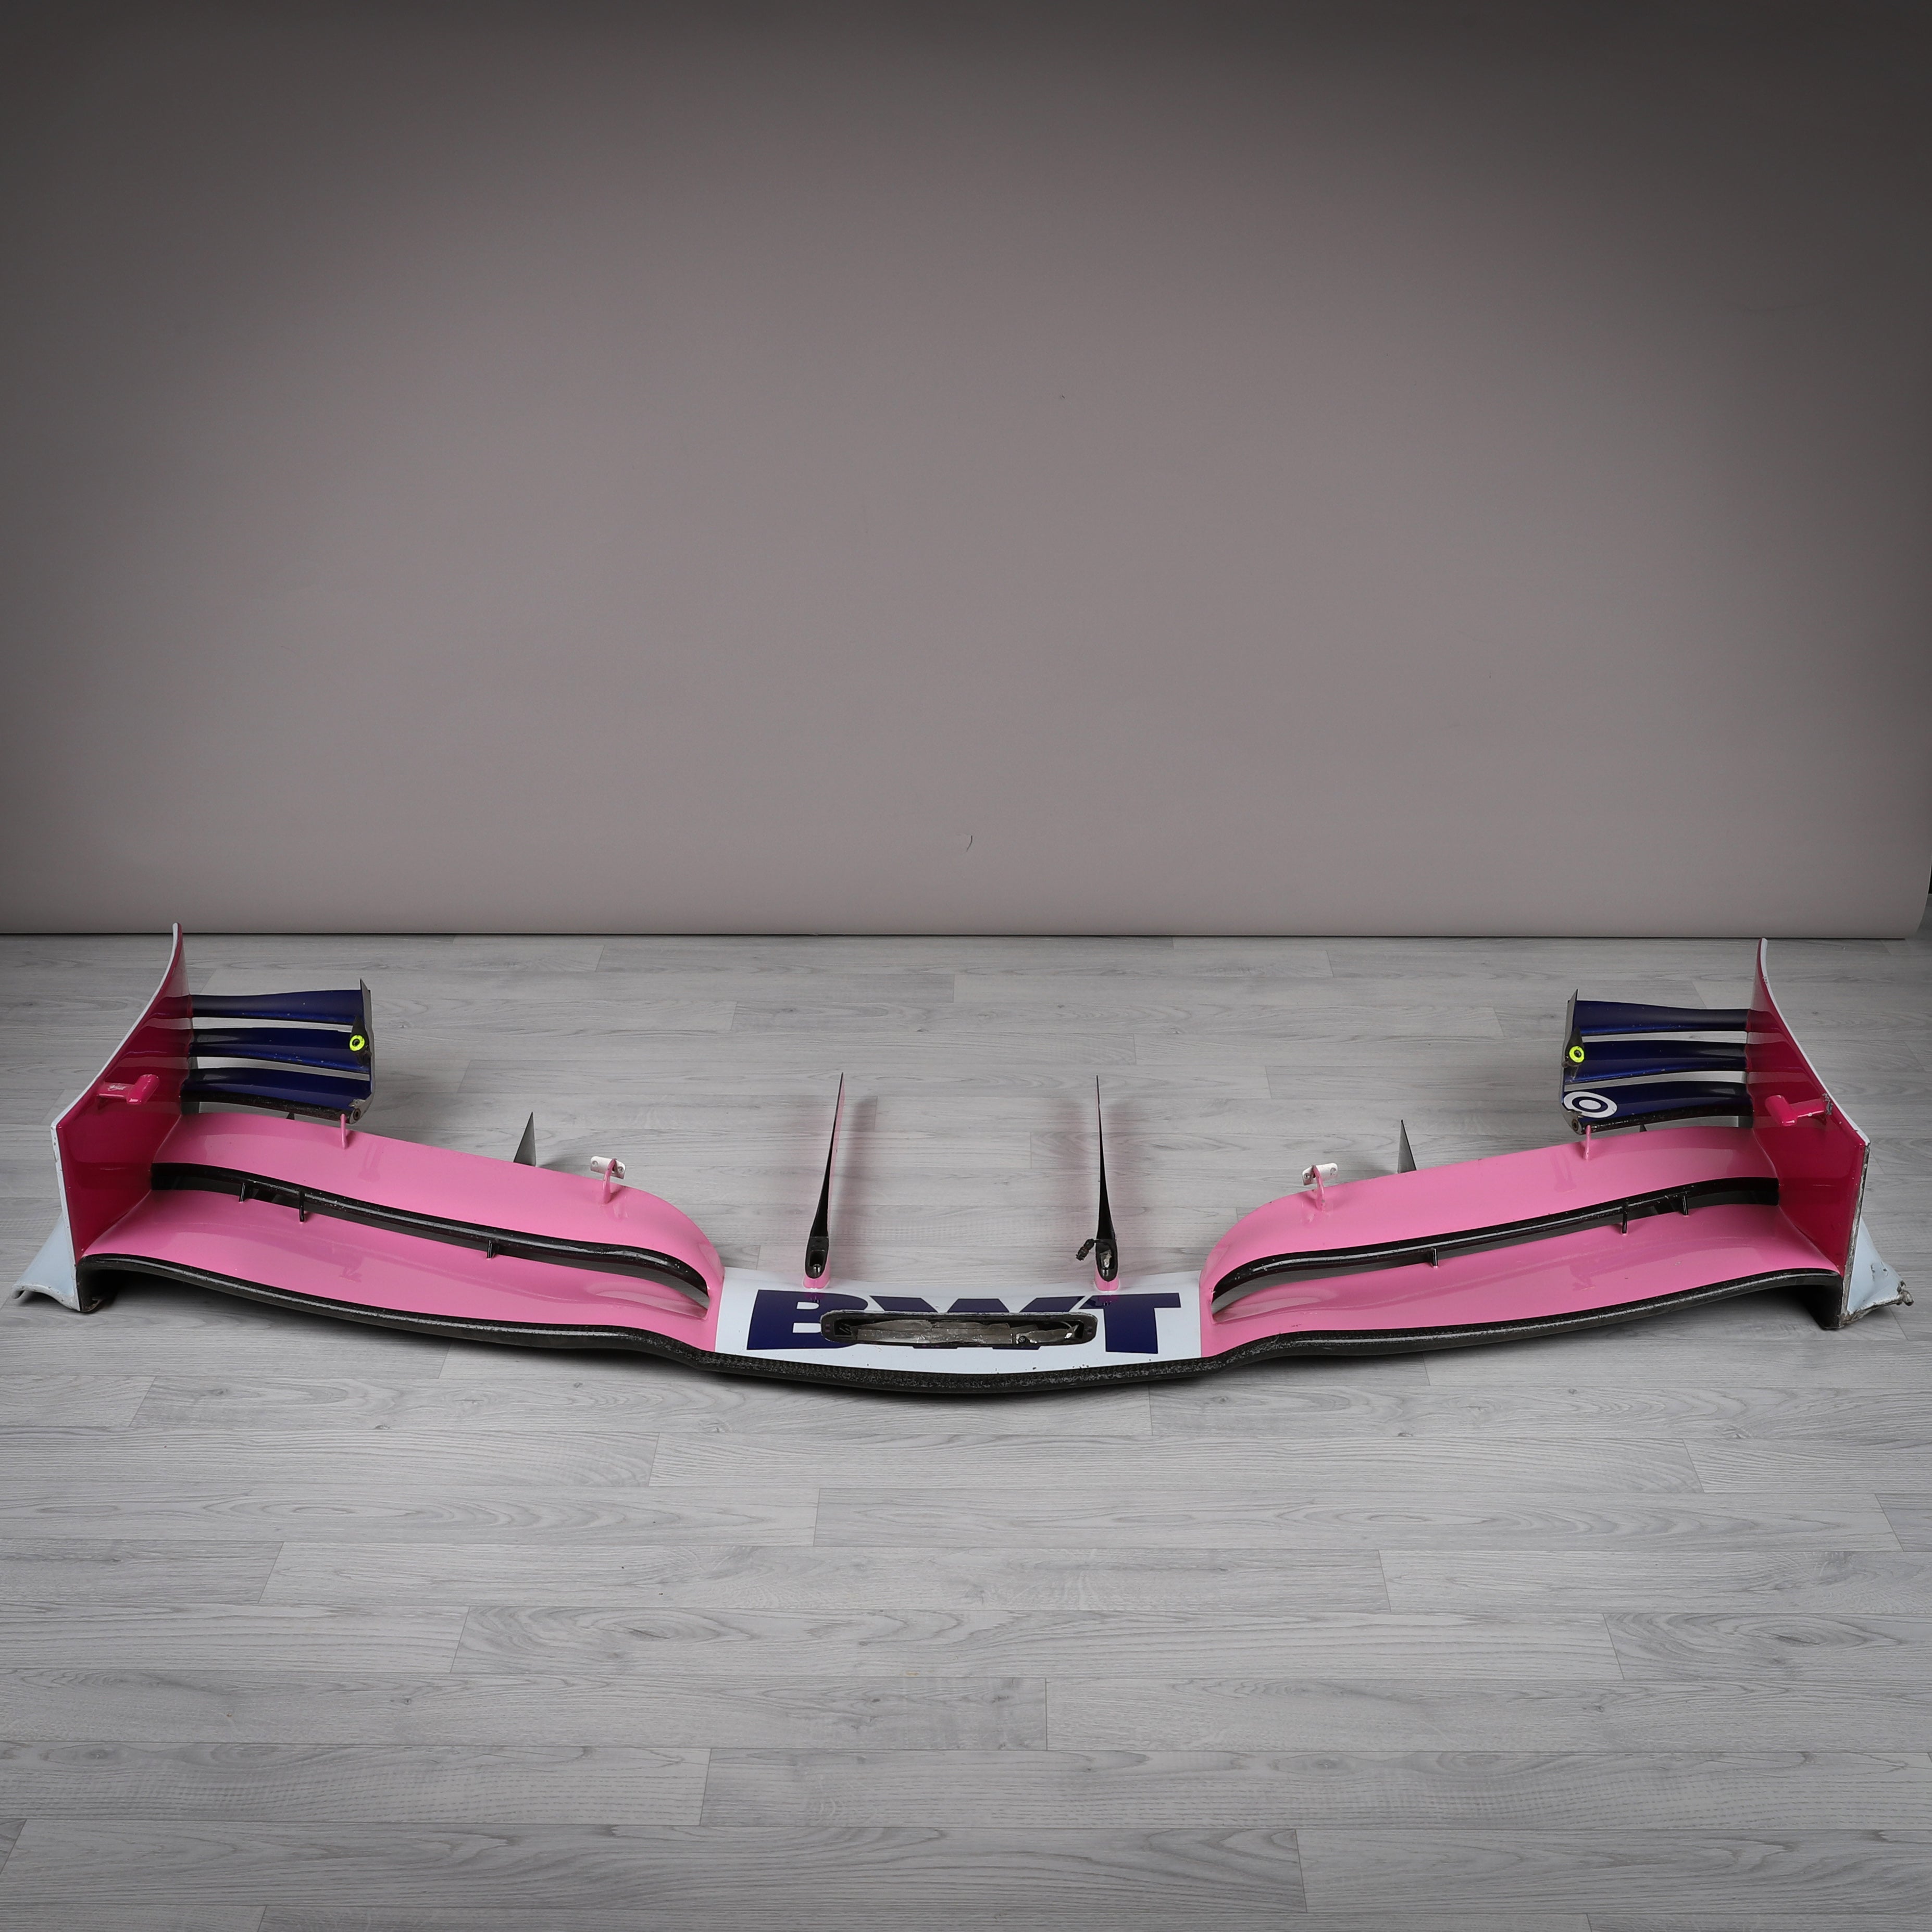 SportPesa Racing Point F1 Team 2019 Front Wing